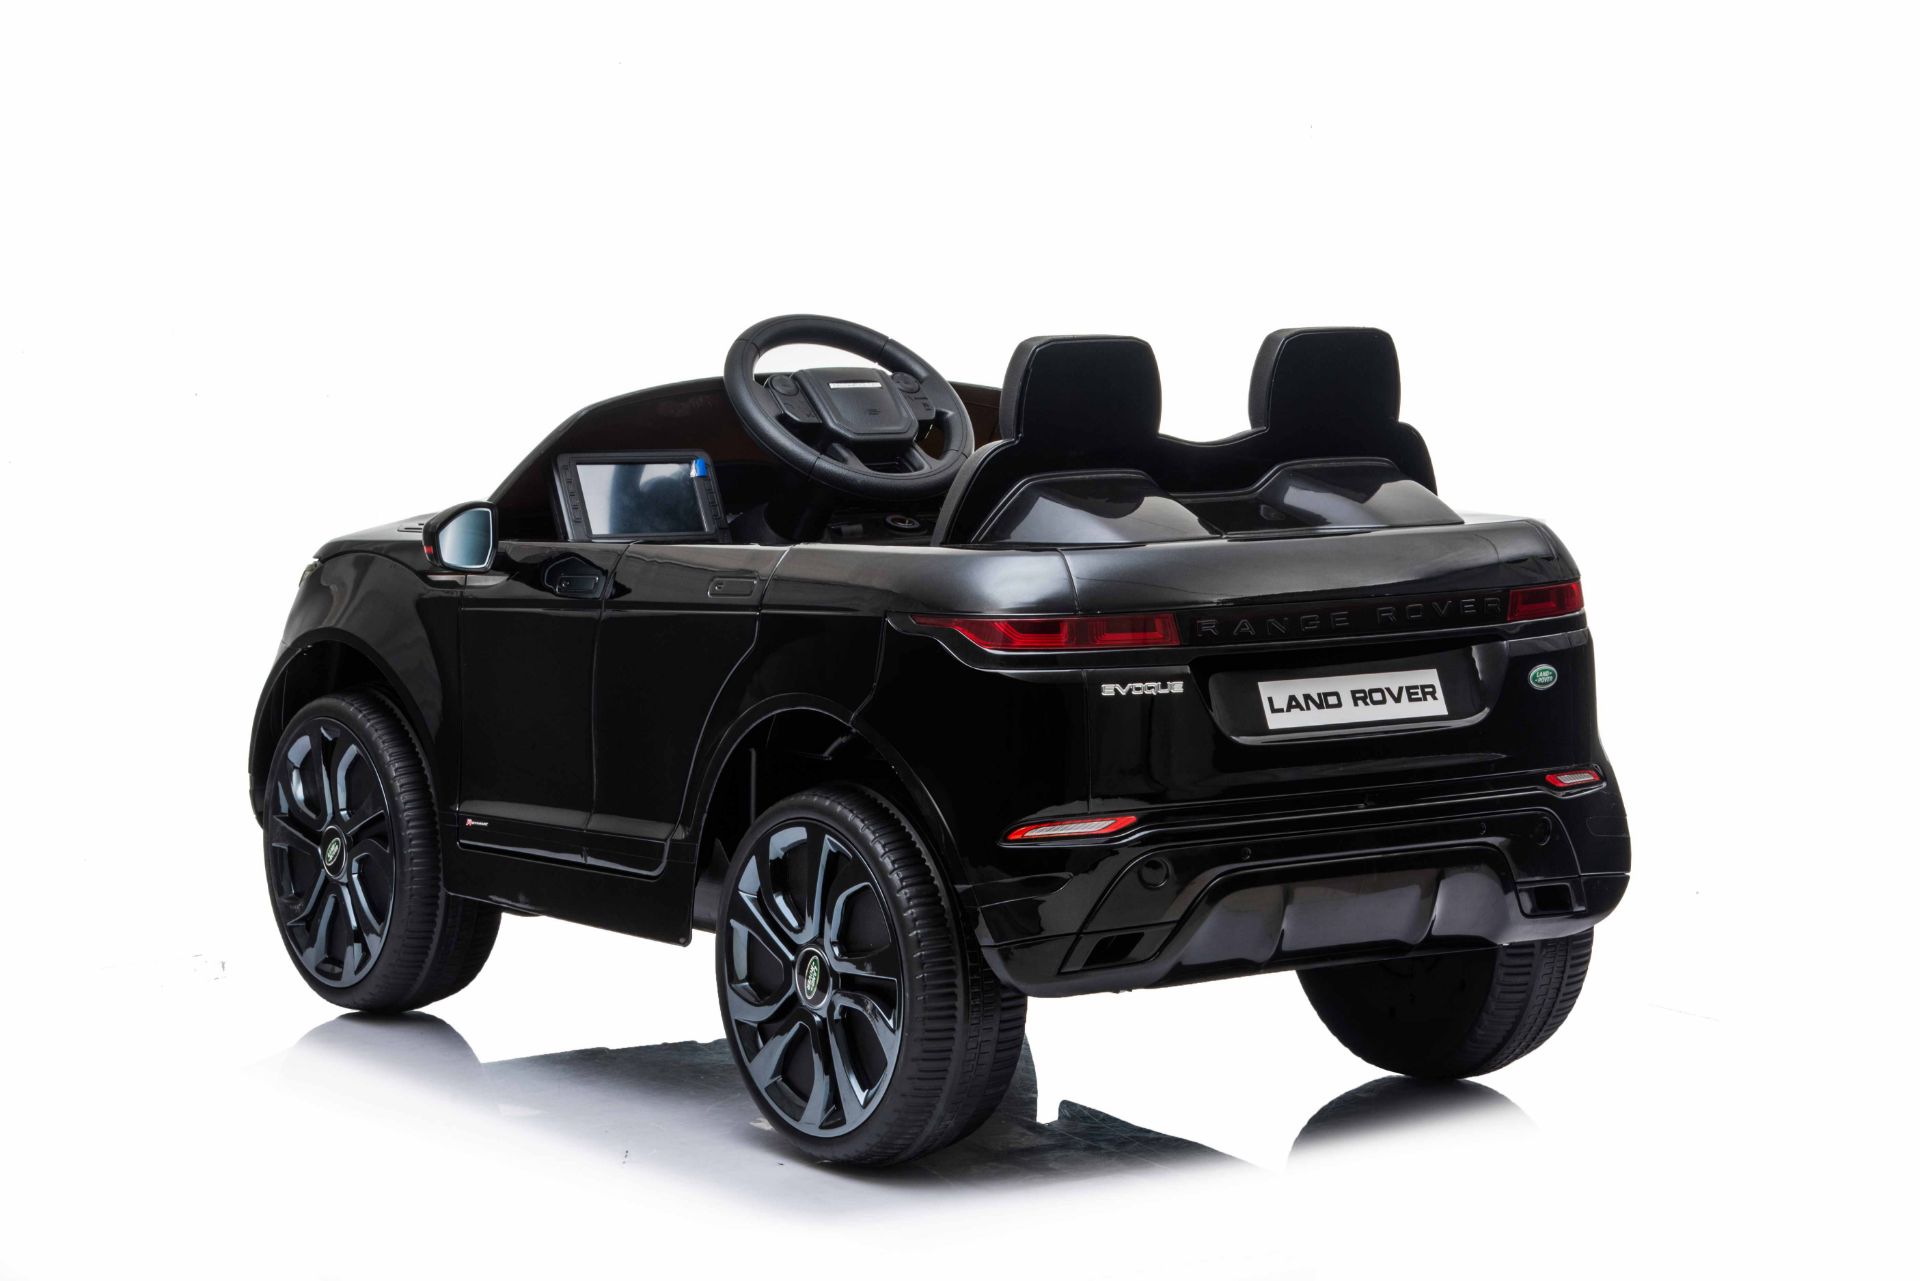 BRAND NEW Ride On Fully Licenced Range Rover Evoque 12v w/ Parental Remote Control and Leather Seat - Image 4 of 7